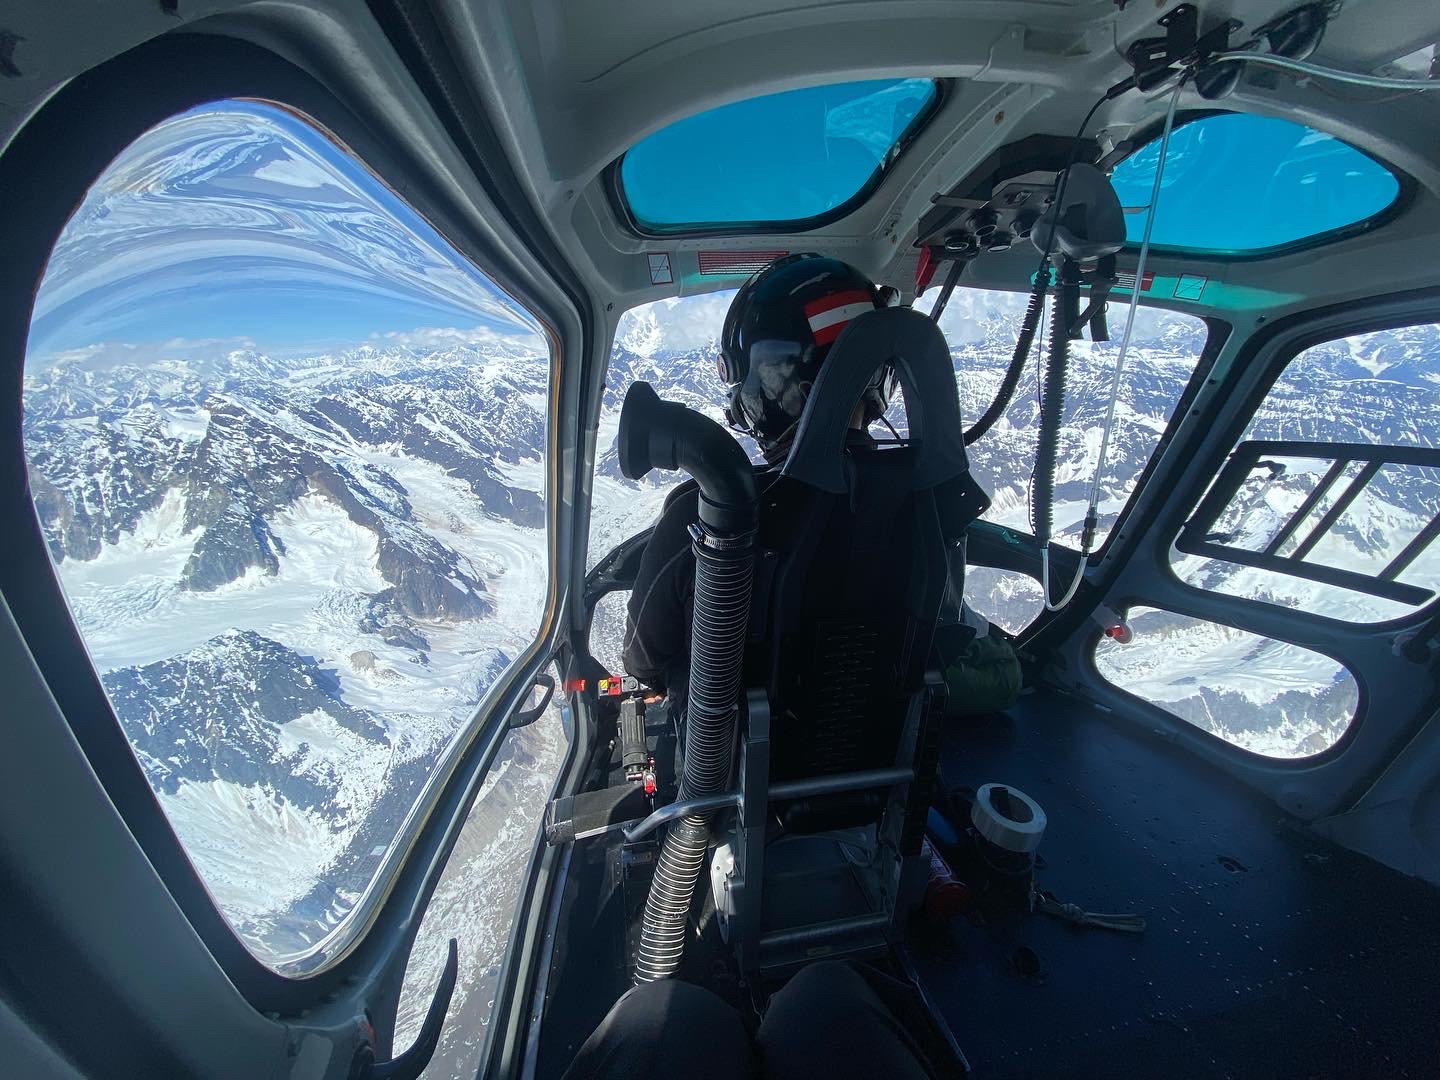 Wide angle view from inside a helicopter flying into the mountains